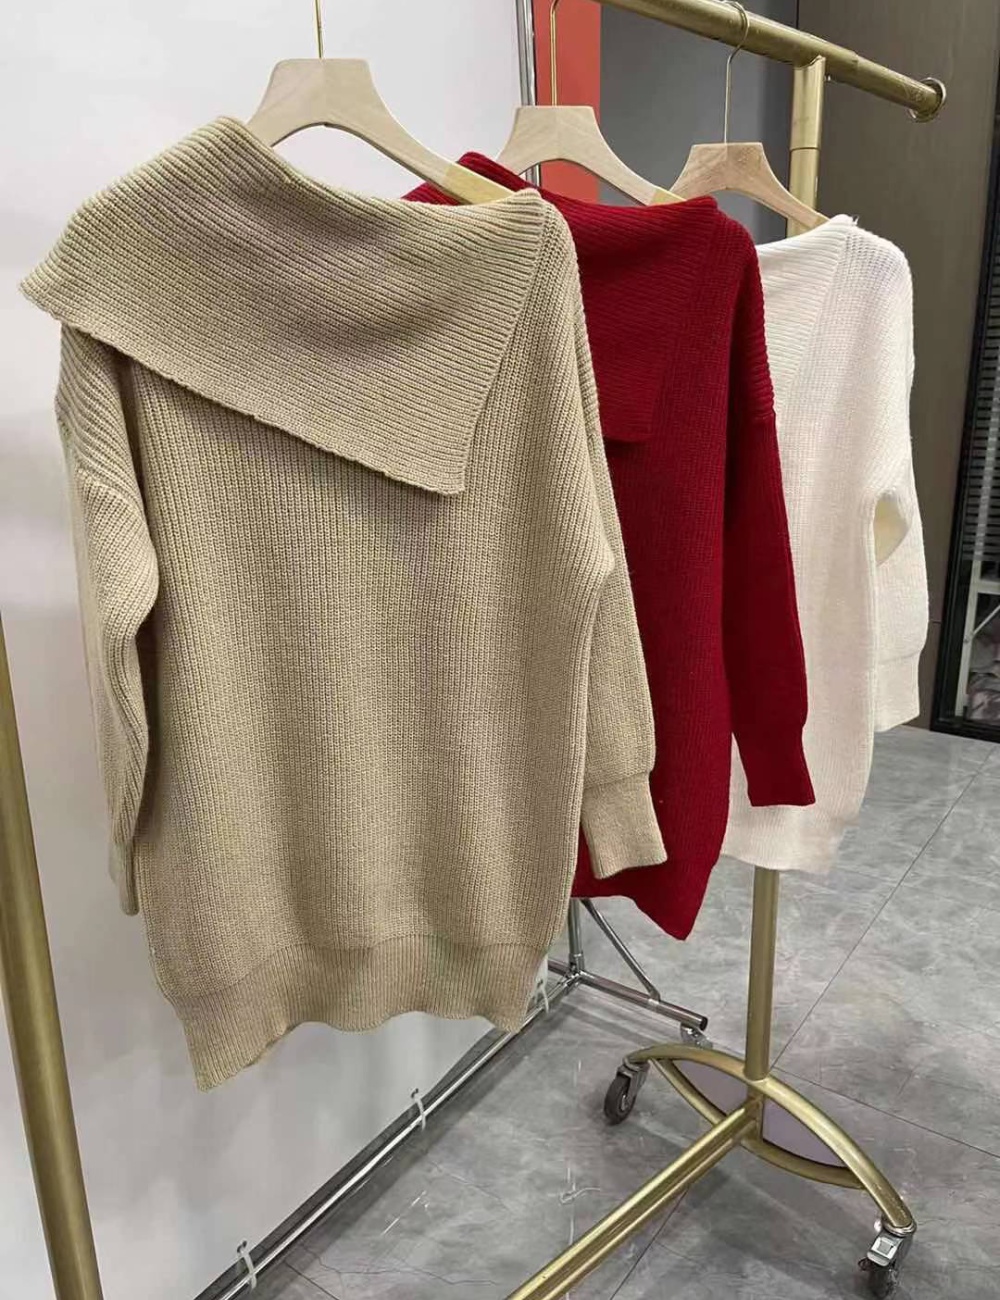 Flat shoulder slim dress lazy knitted sweater for women